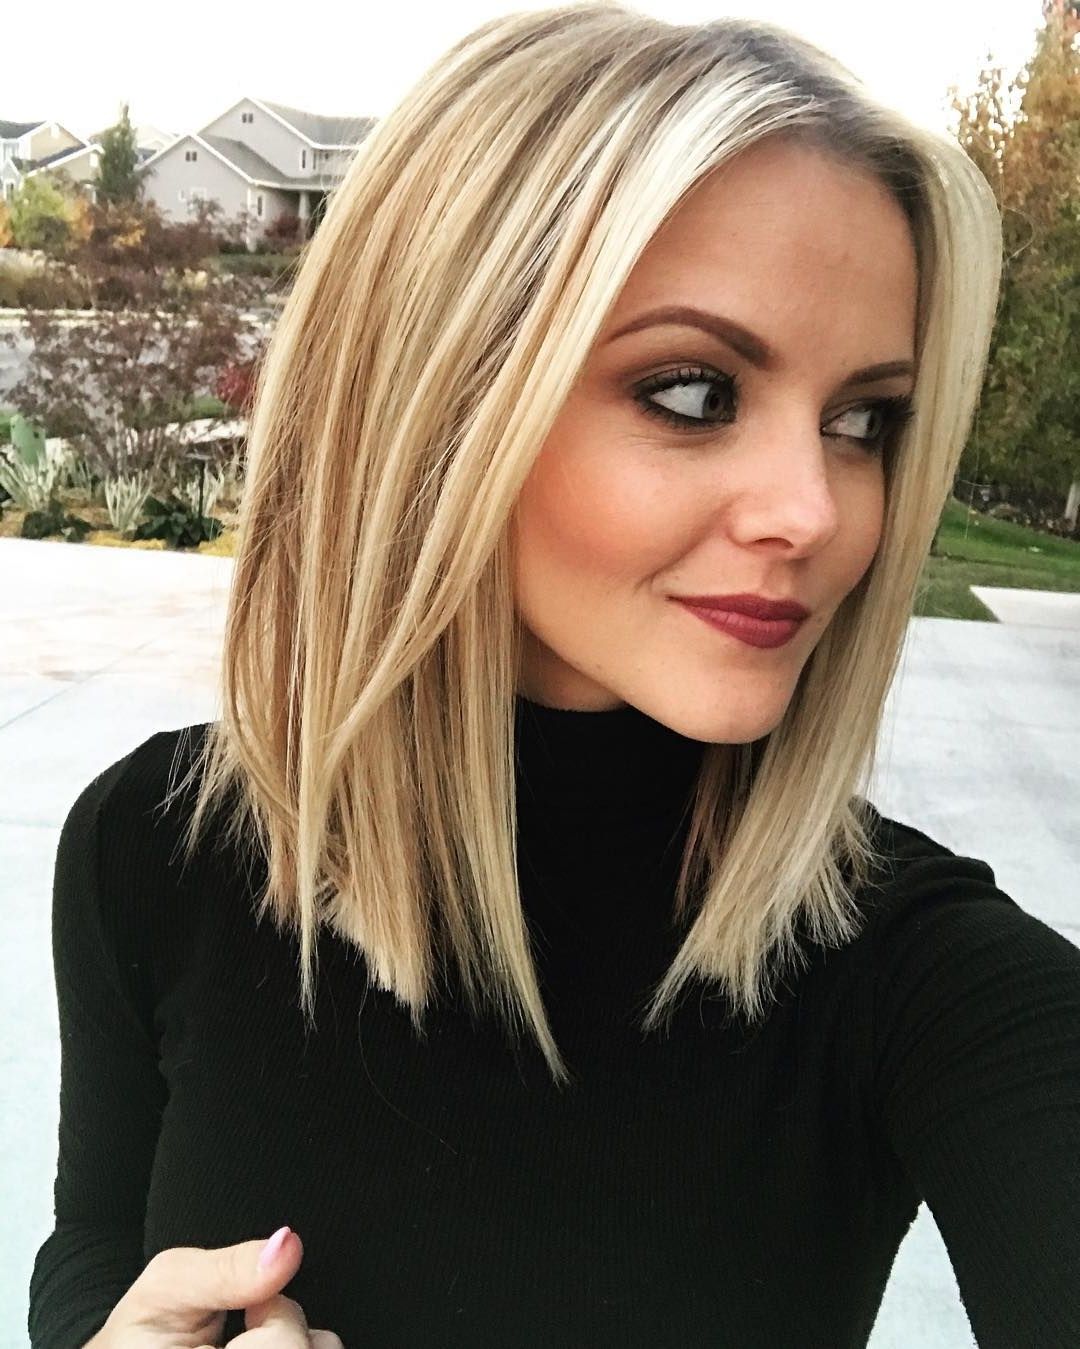 Current Messy Blonde Lob Hairstyles With 10 Stylish & Sweet Lob Haircut Ideas, 2018 Shoulder Length Hairstyles (View 9 of 20)